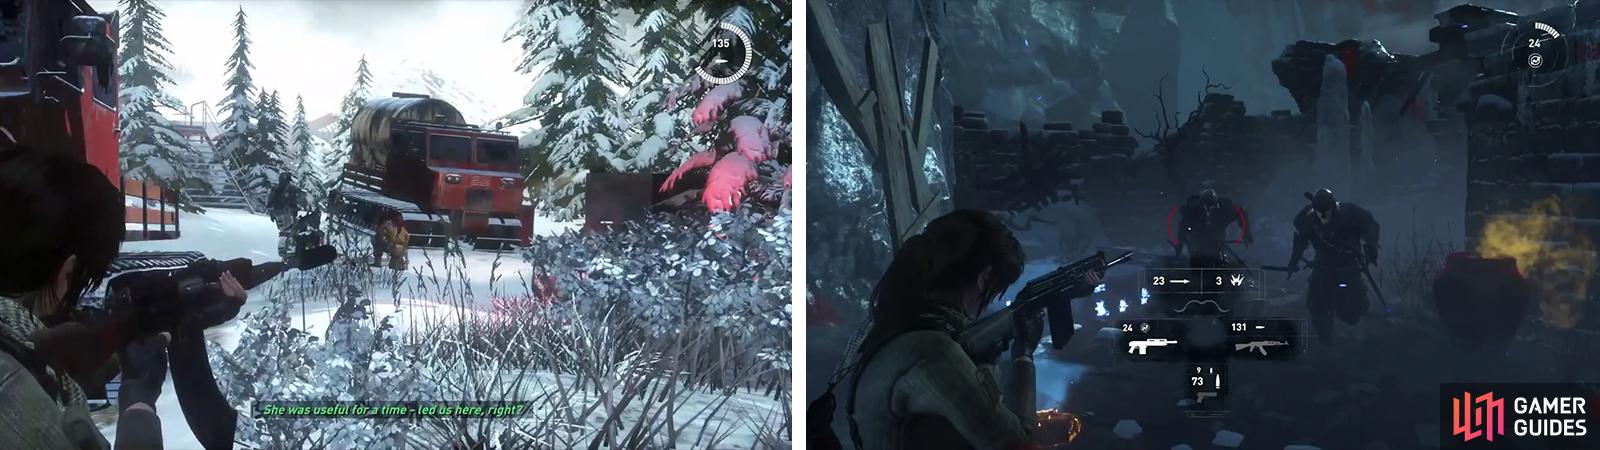 The Rifles can be equipped with silencers (left) and grenade launchers. The Shotguns can be used for a wider spread of damage (right).